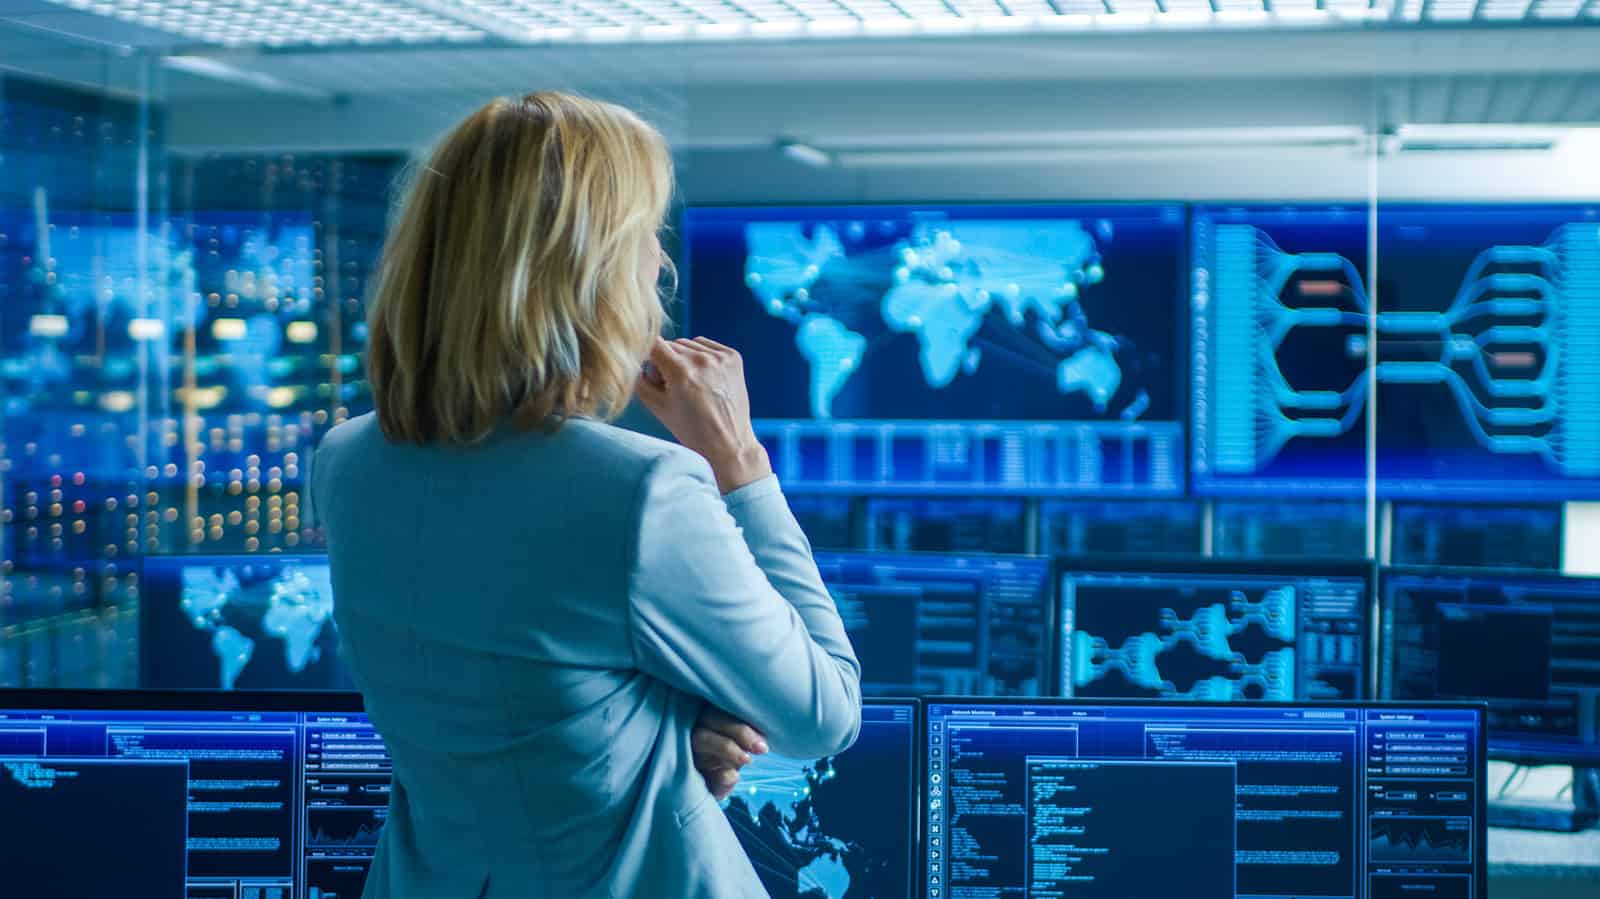 Woman looking at screens of data in a data centre control room